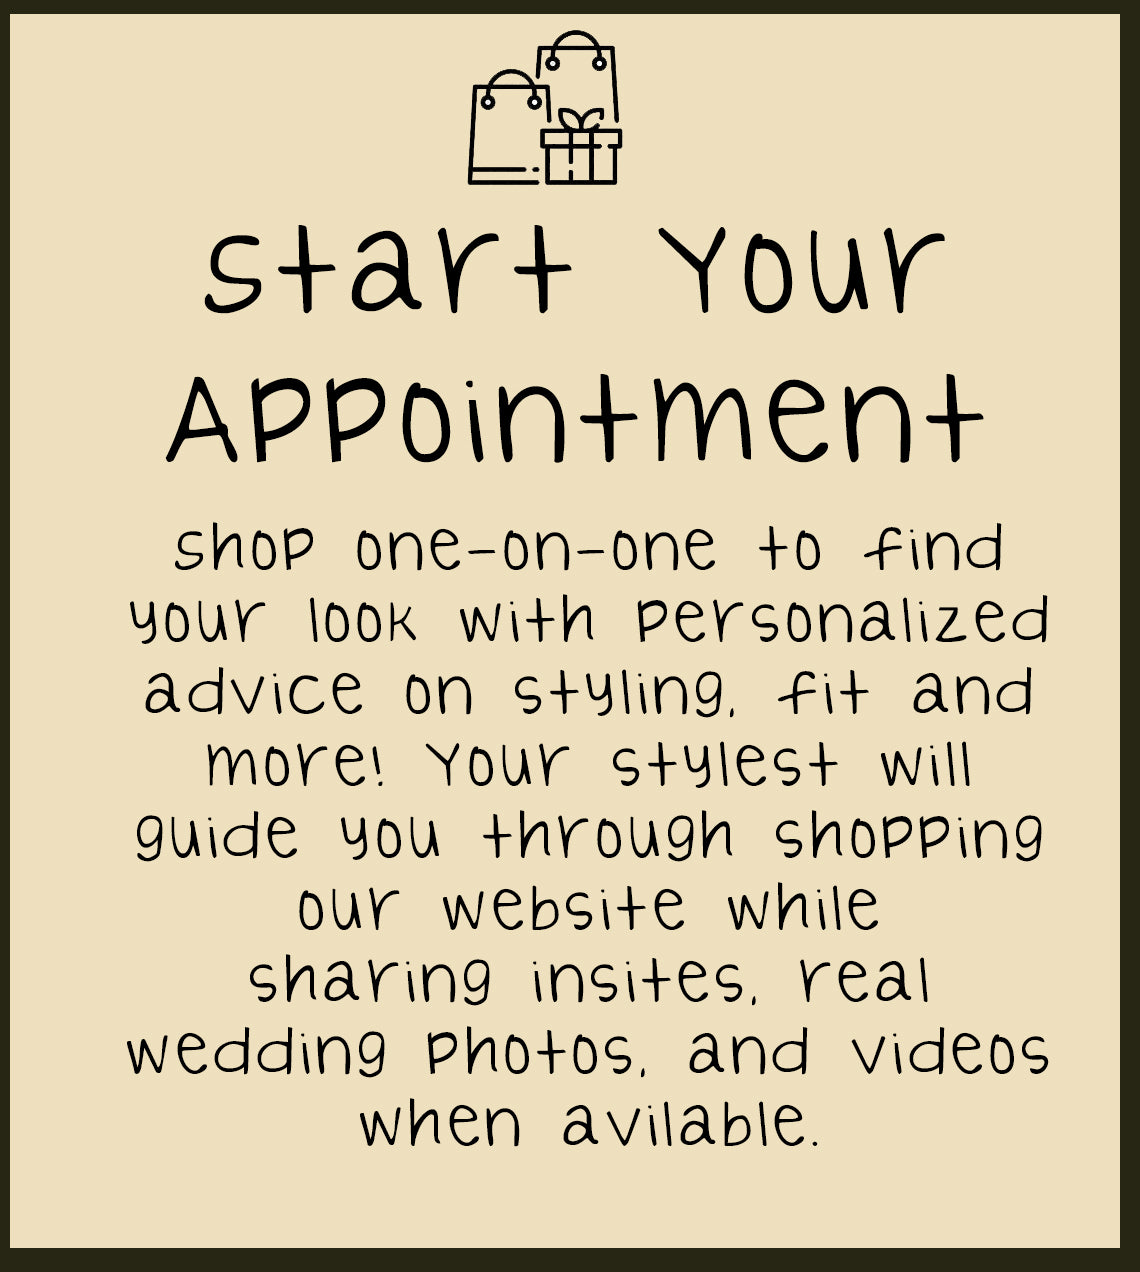 Virtual Bridal Appointments (appointment options listed in description below)